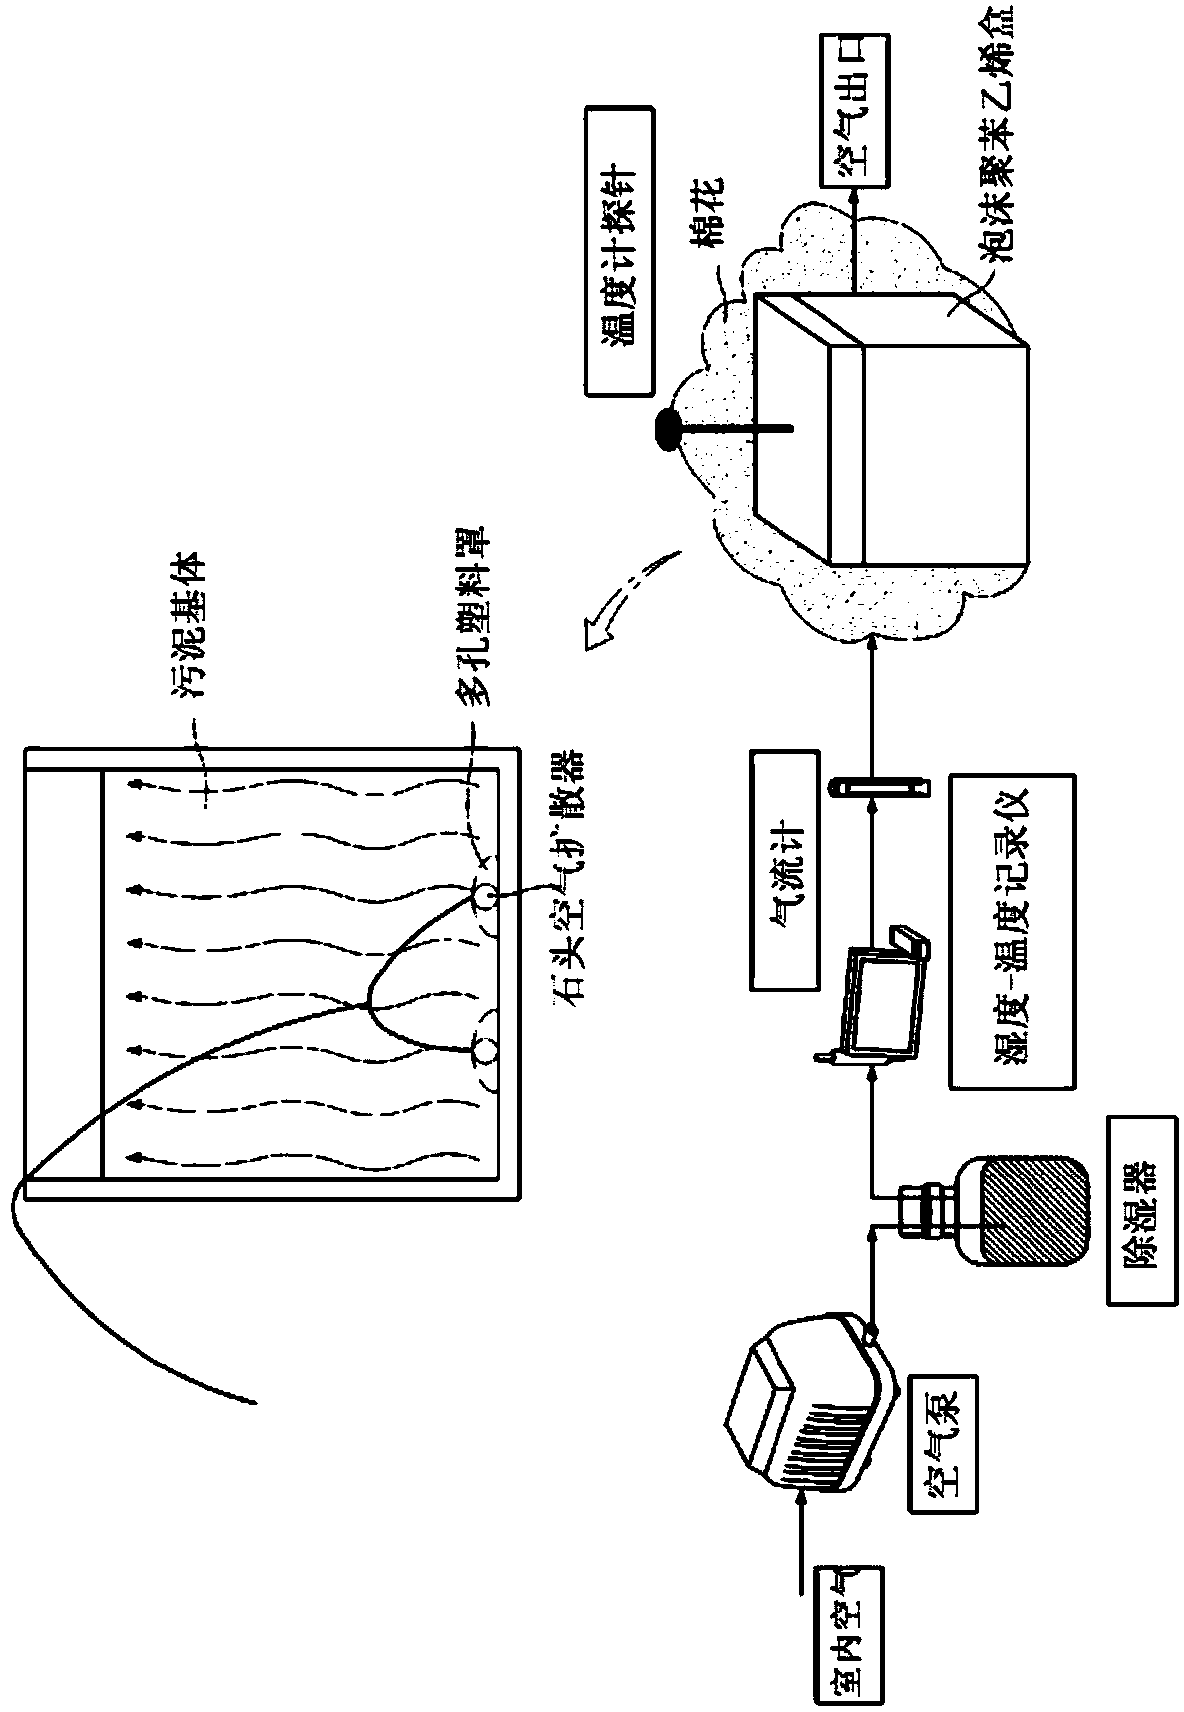 Non-discharge method for treating highly concentrated organic waste water using bio-evaporation